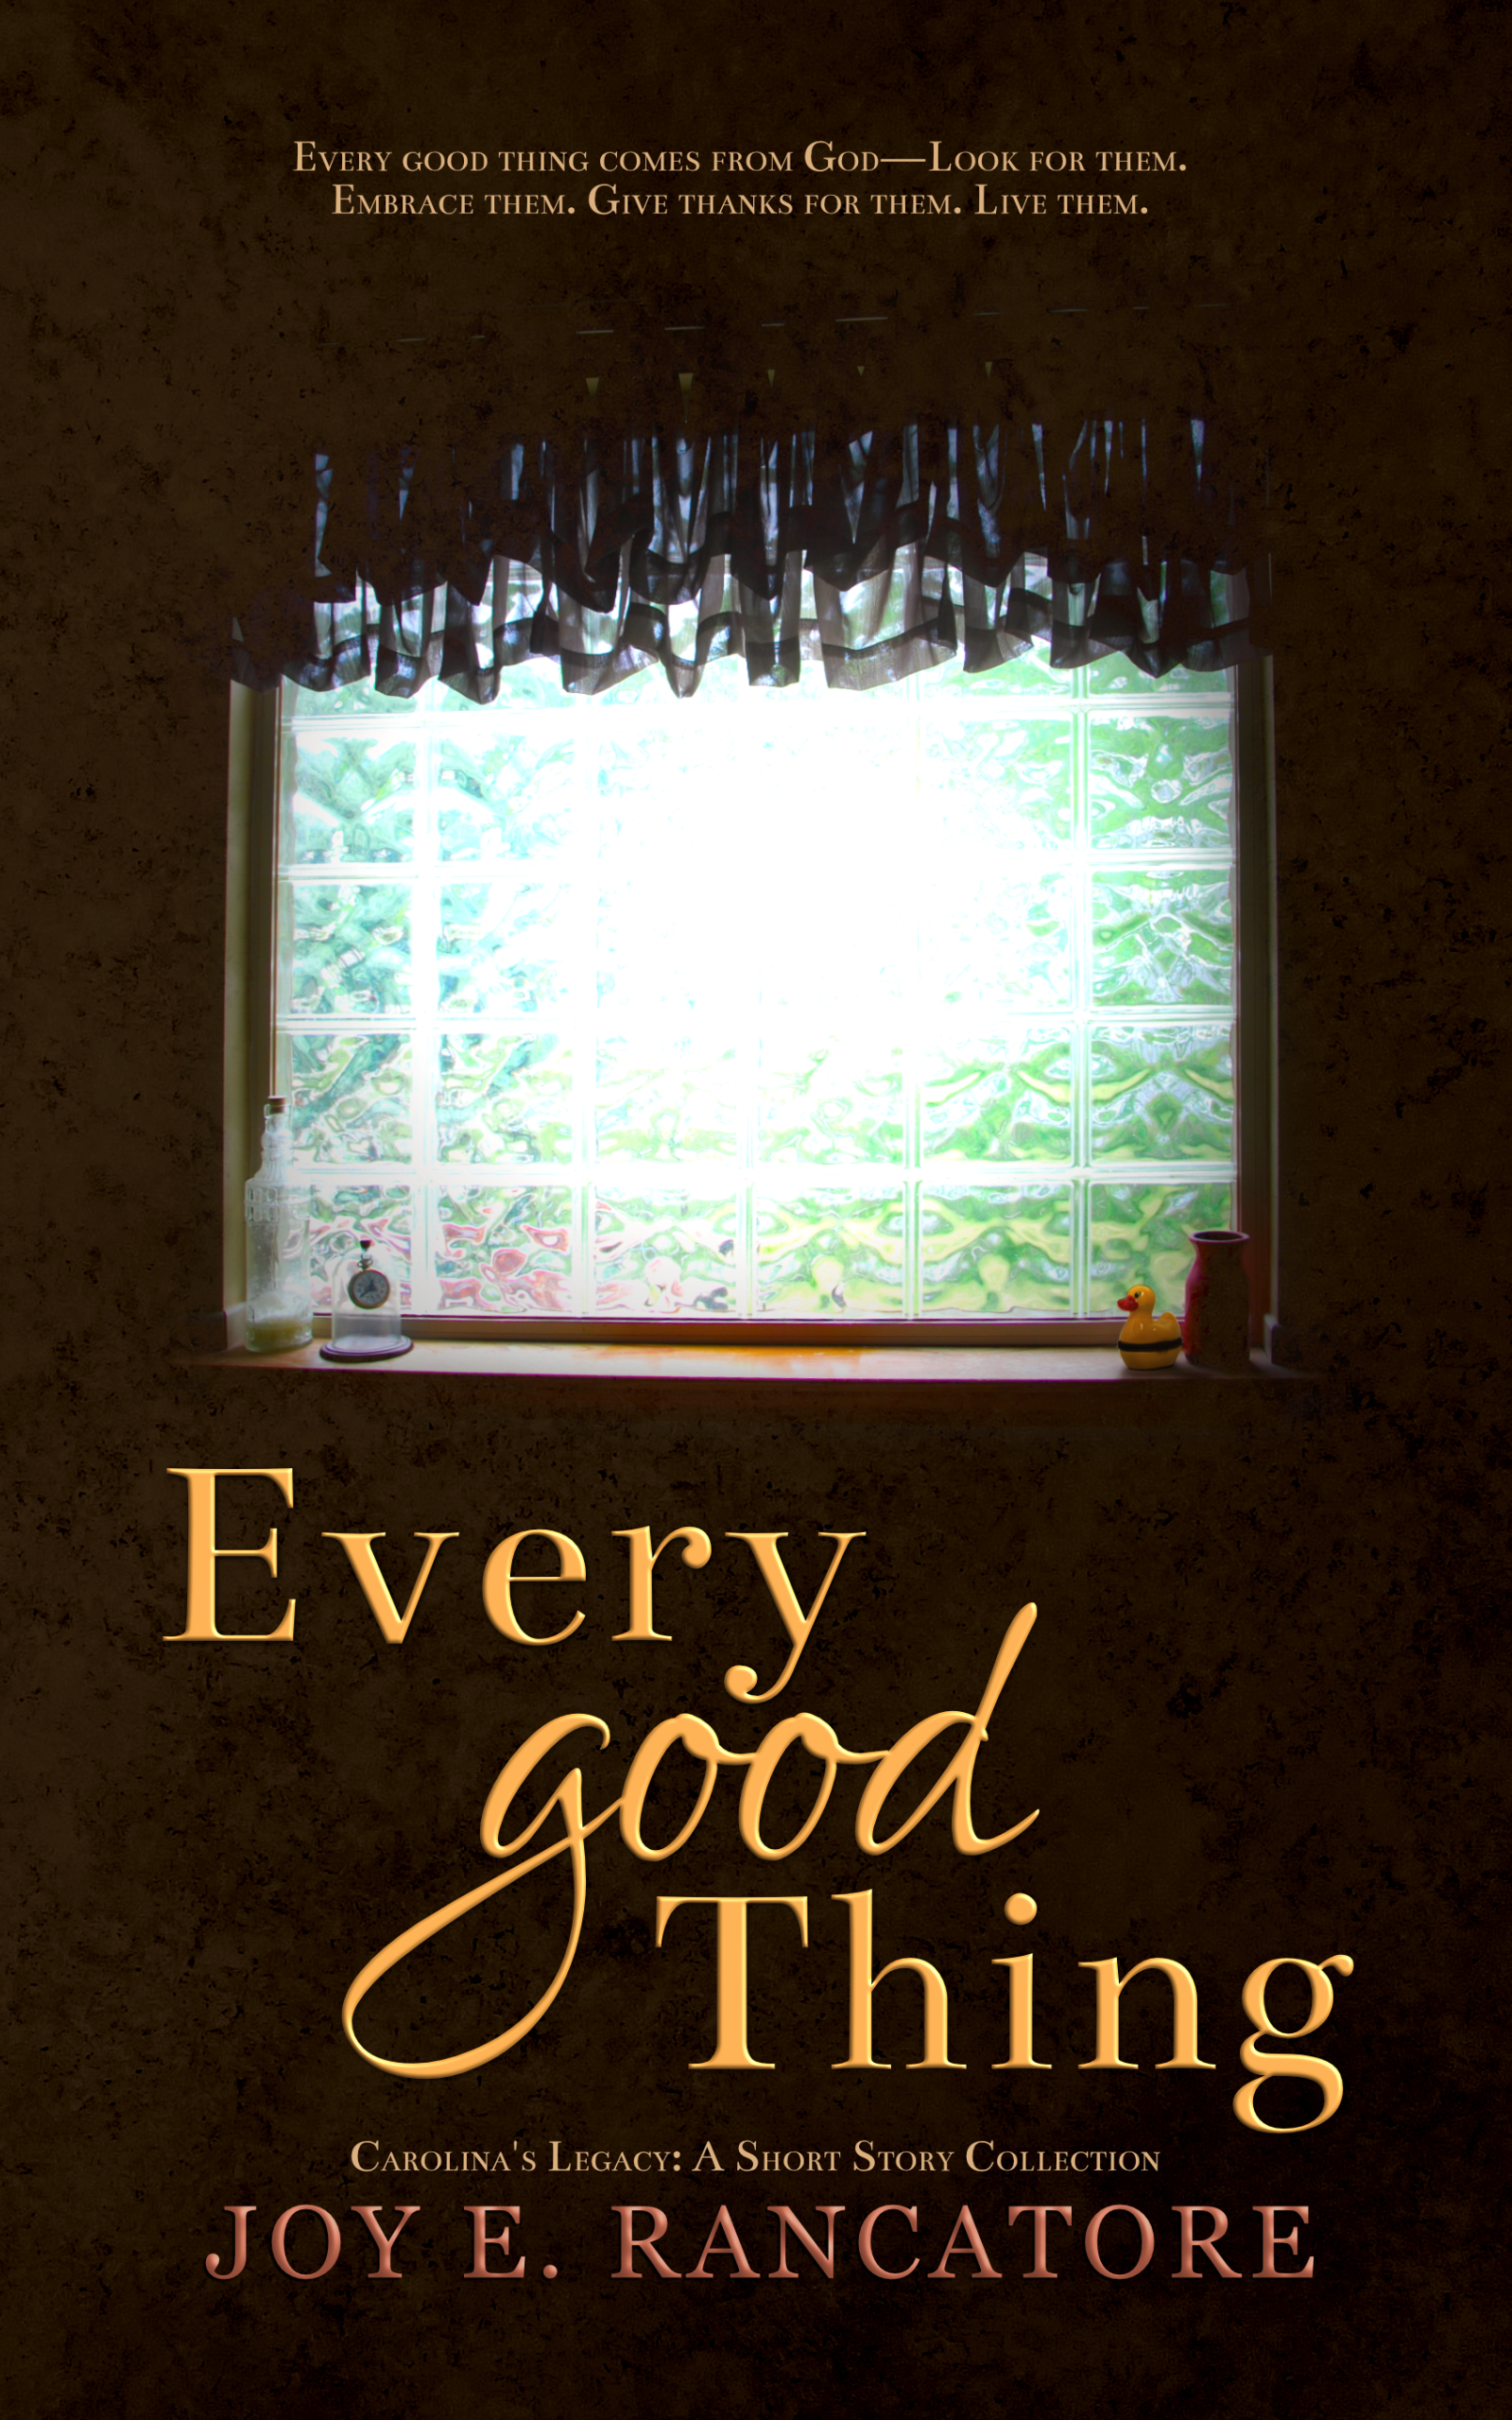 Every Good Thing, a short story collection by Joy E. Rancatore, part of Carolina's Legacy Collection